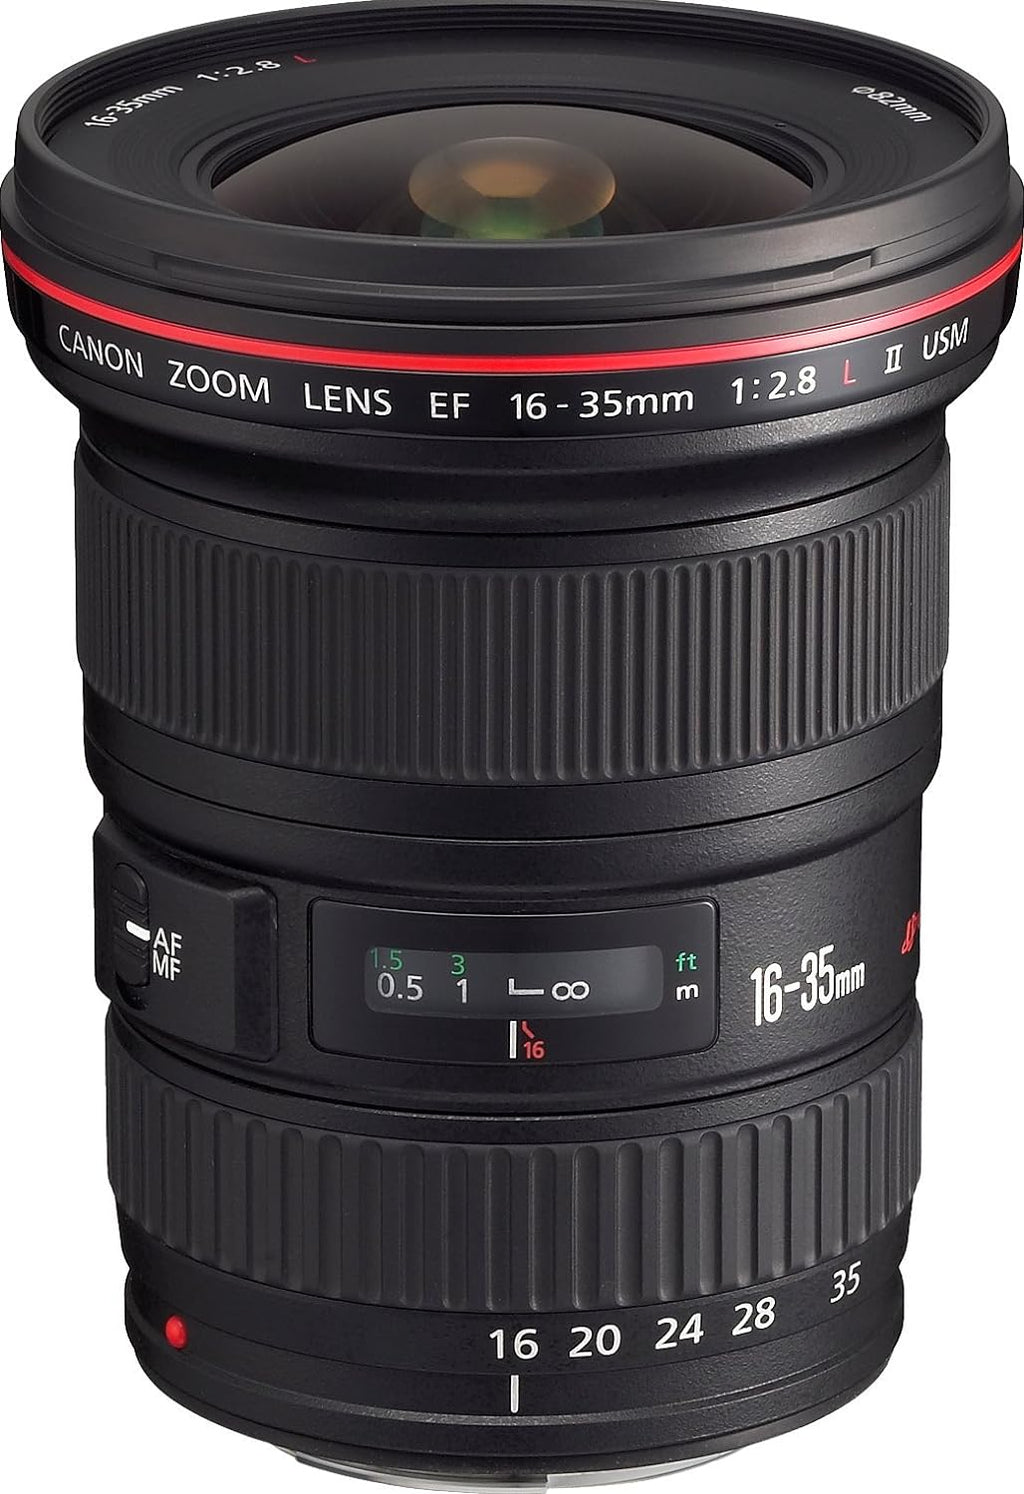 Used Canon EF 16-35mm F:2.8L II USM Wide Angle Zoom Lens for Canon DSLR Camera